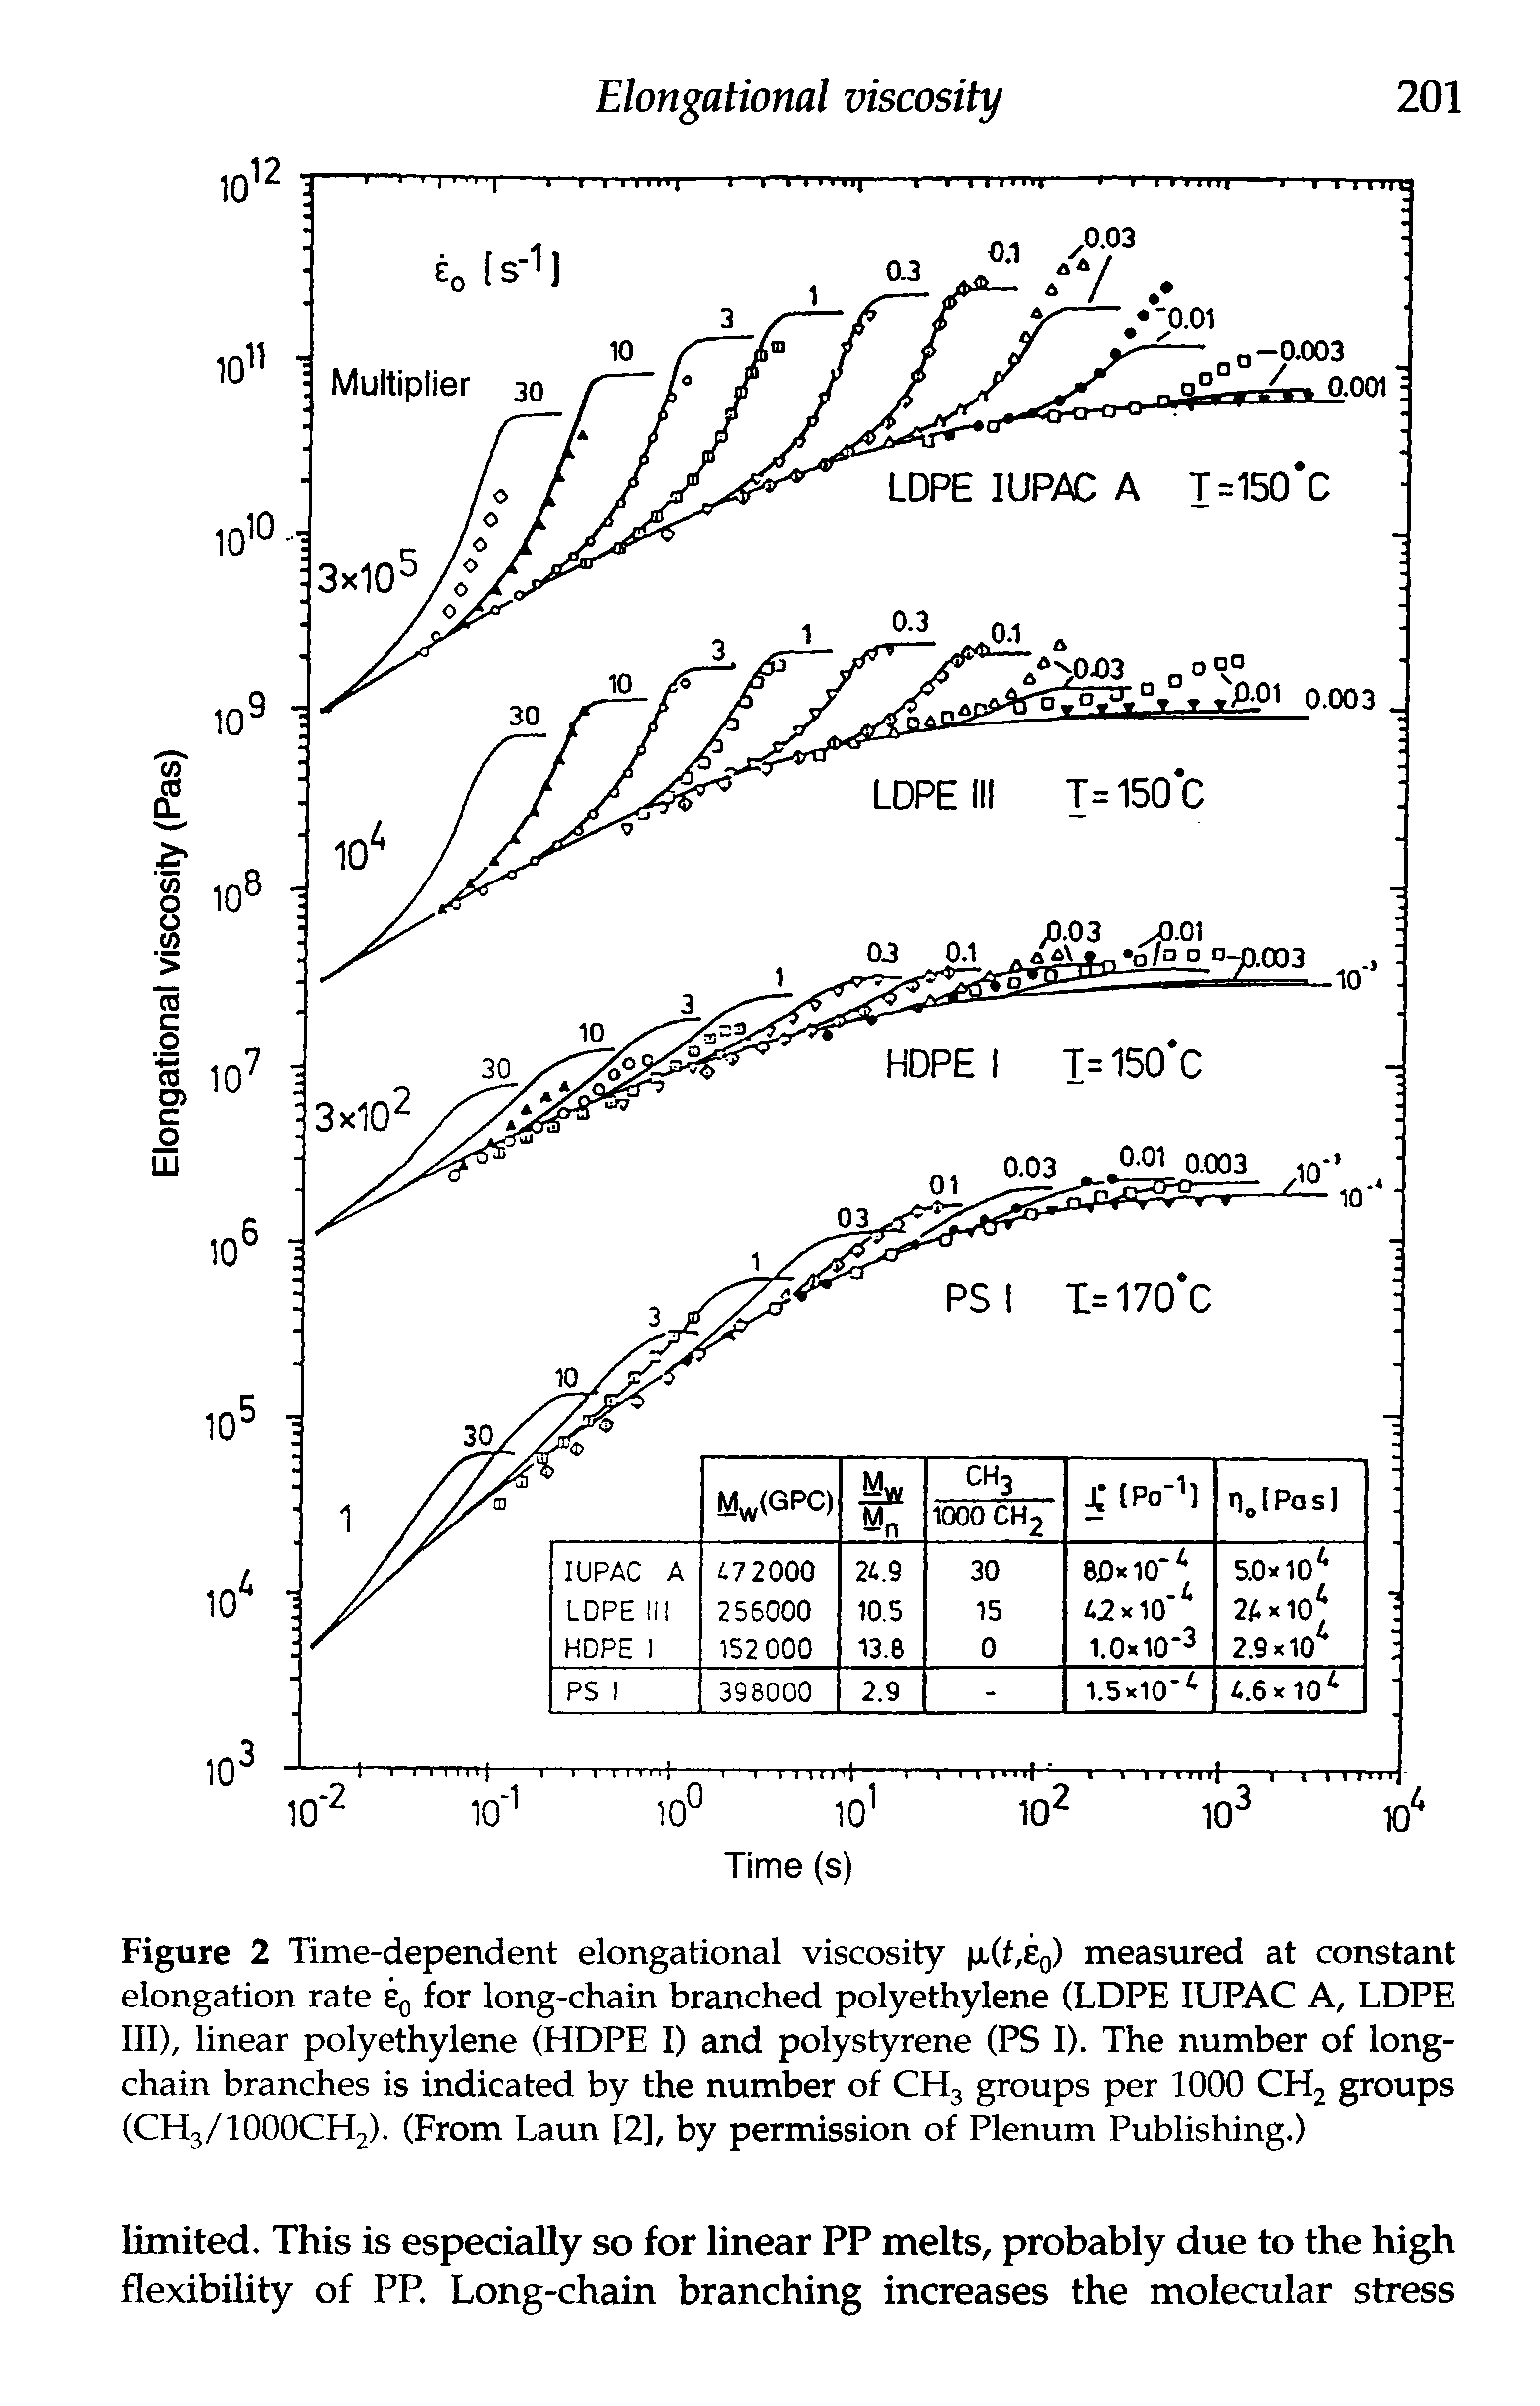 Figure 2 Time-dependent elongational viscosity (Ji(f,eo) measured at constant elongation rate for long-chain branched polyethylene (LDPE lUPAC A, LDPE 111), linear polyethylene (HOPE I) and polystyrene (PS I). The number of long-chain branches is indicated by the number of CHj groups per 1000 CHj groups (CHj/lOOOCHj). (From Laun [2], by permission of Plenum Publishing.)...